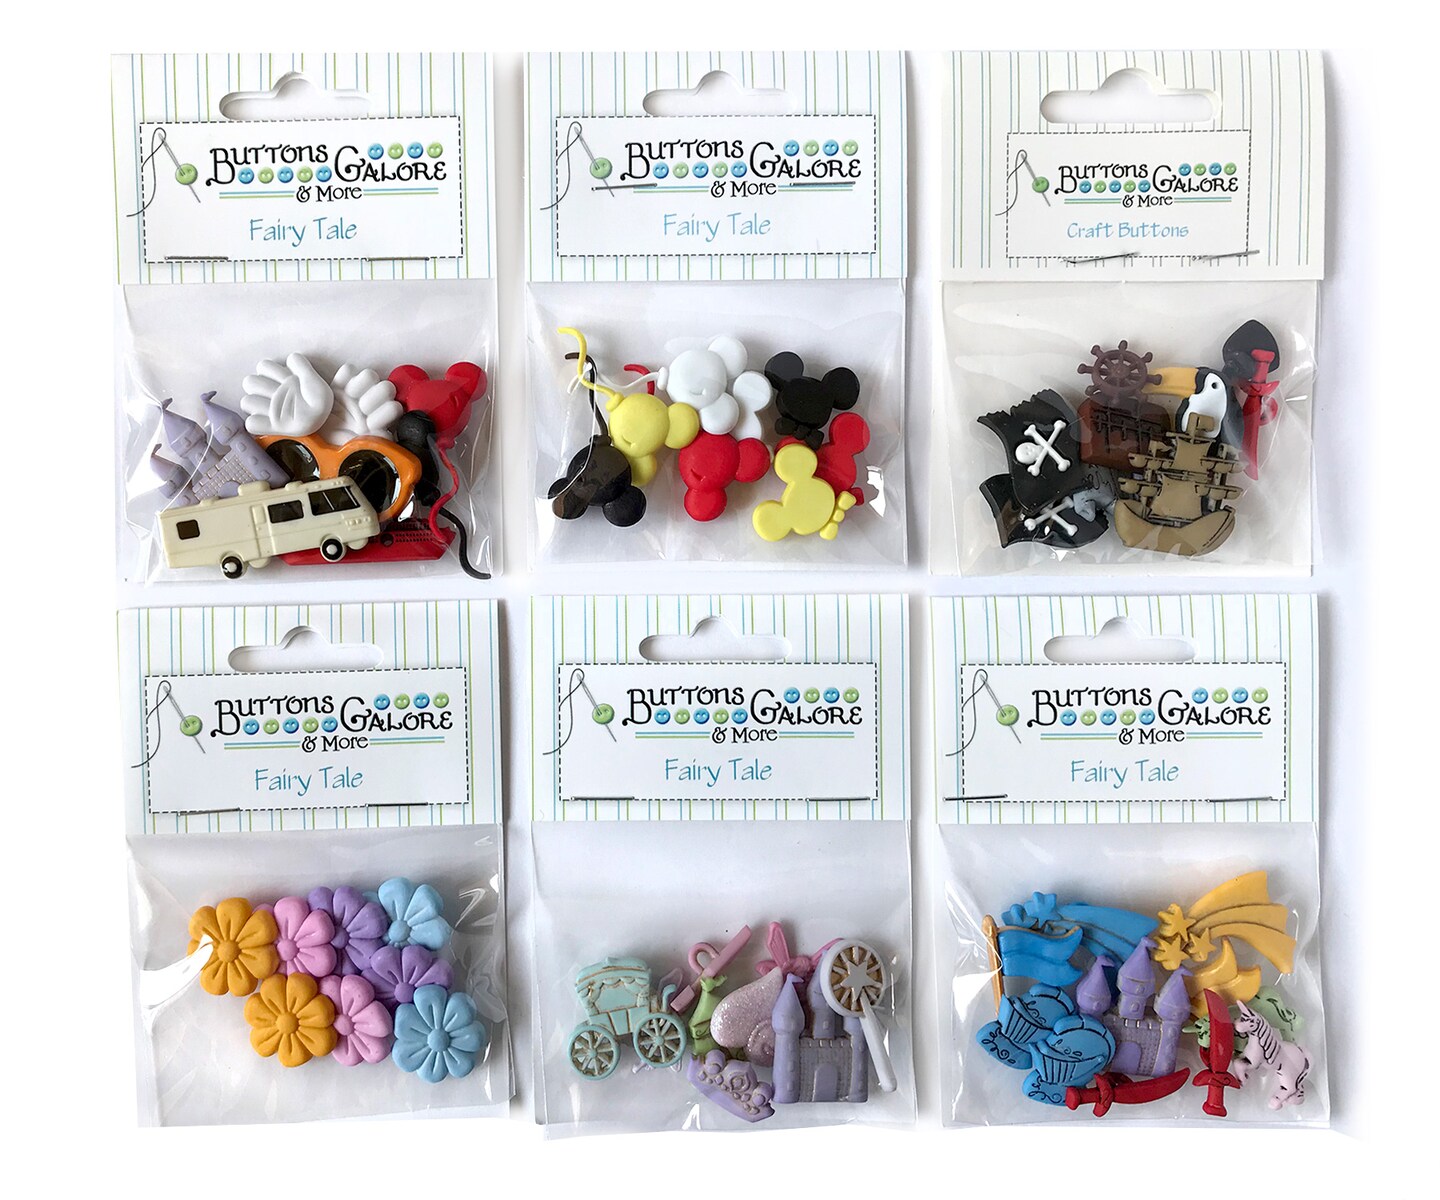 Buttons Galore 50+ Assorted Fairytale Buttons for Sewing &#x26; Crafts - 6 Button Pack